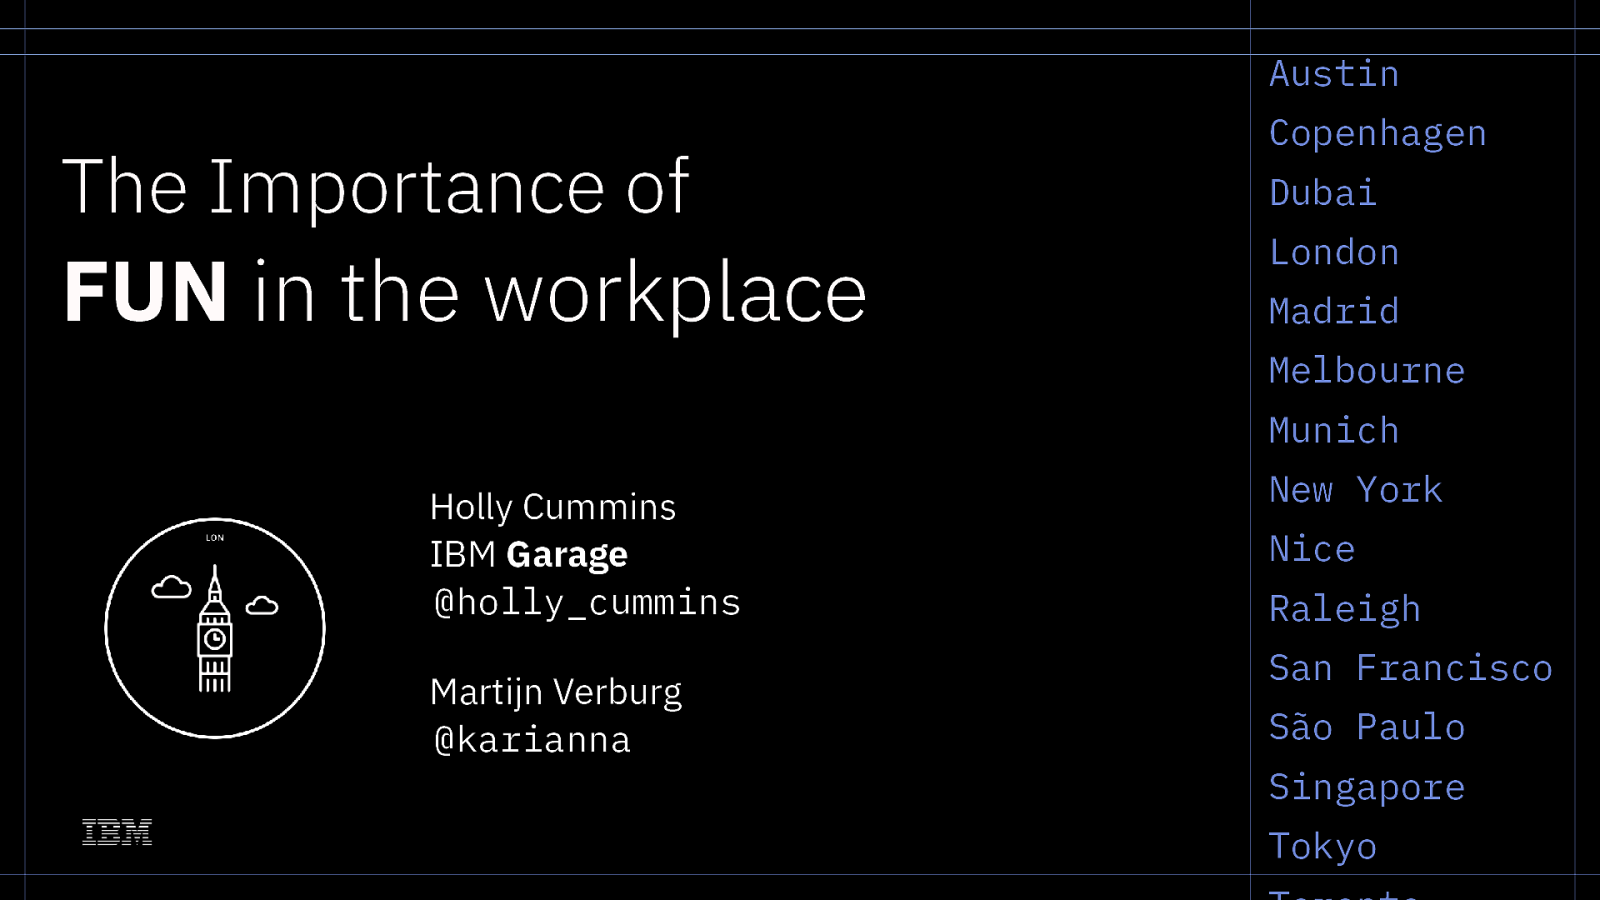 The Importance of Fun in the Workplace (keynote)